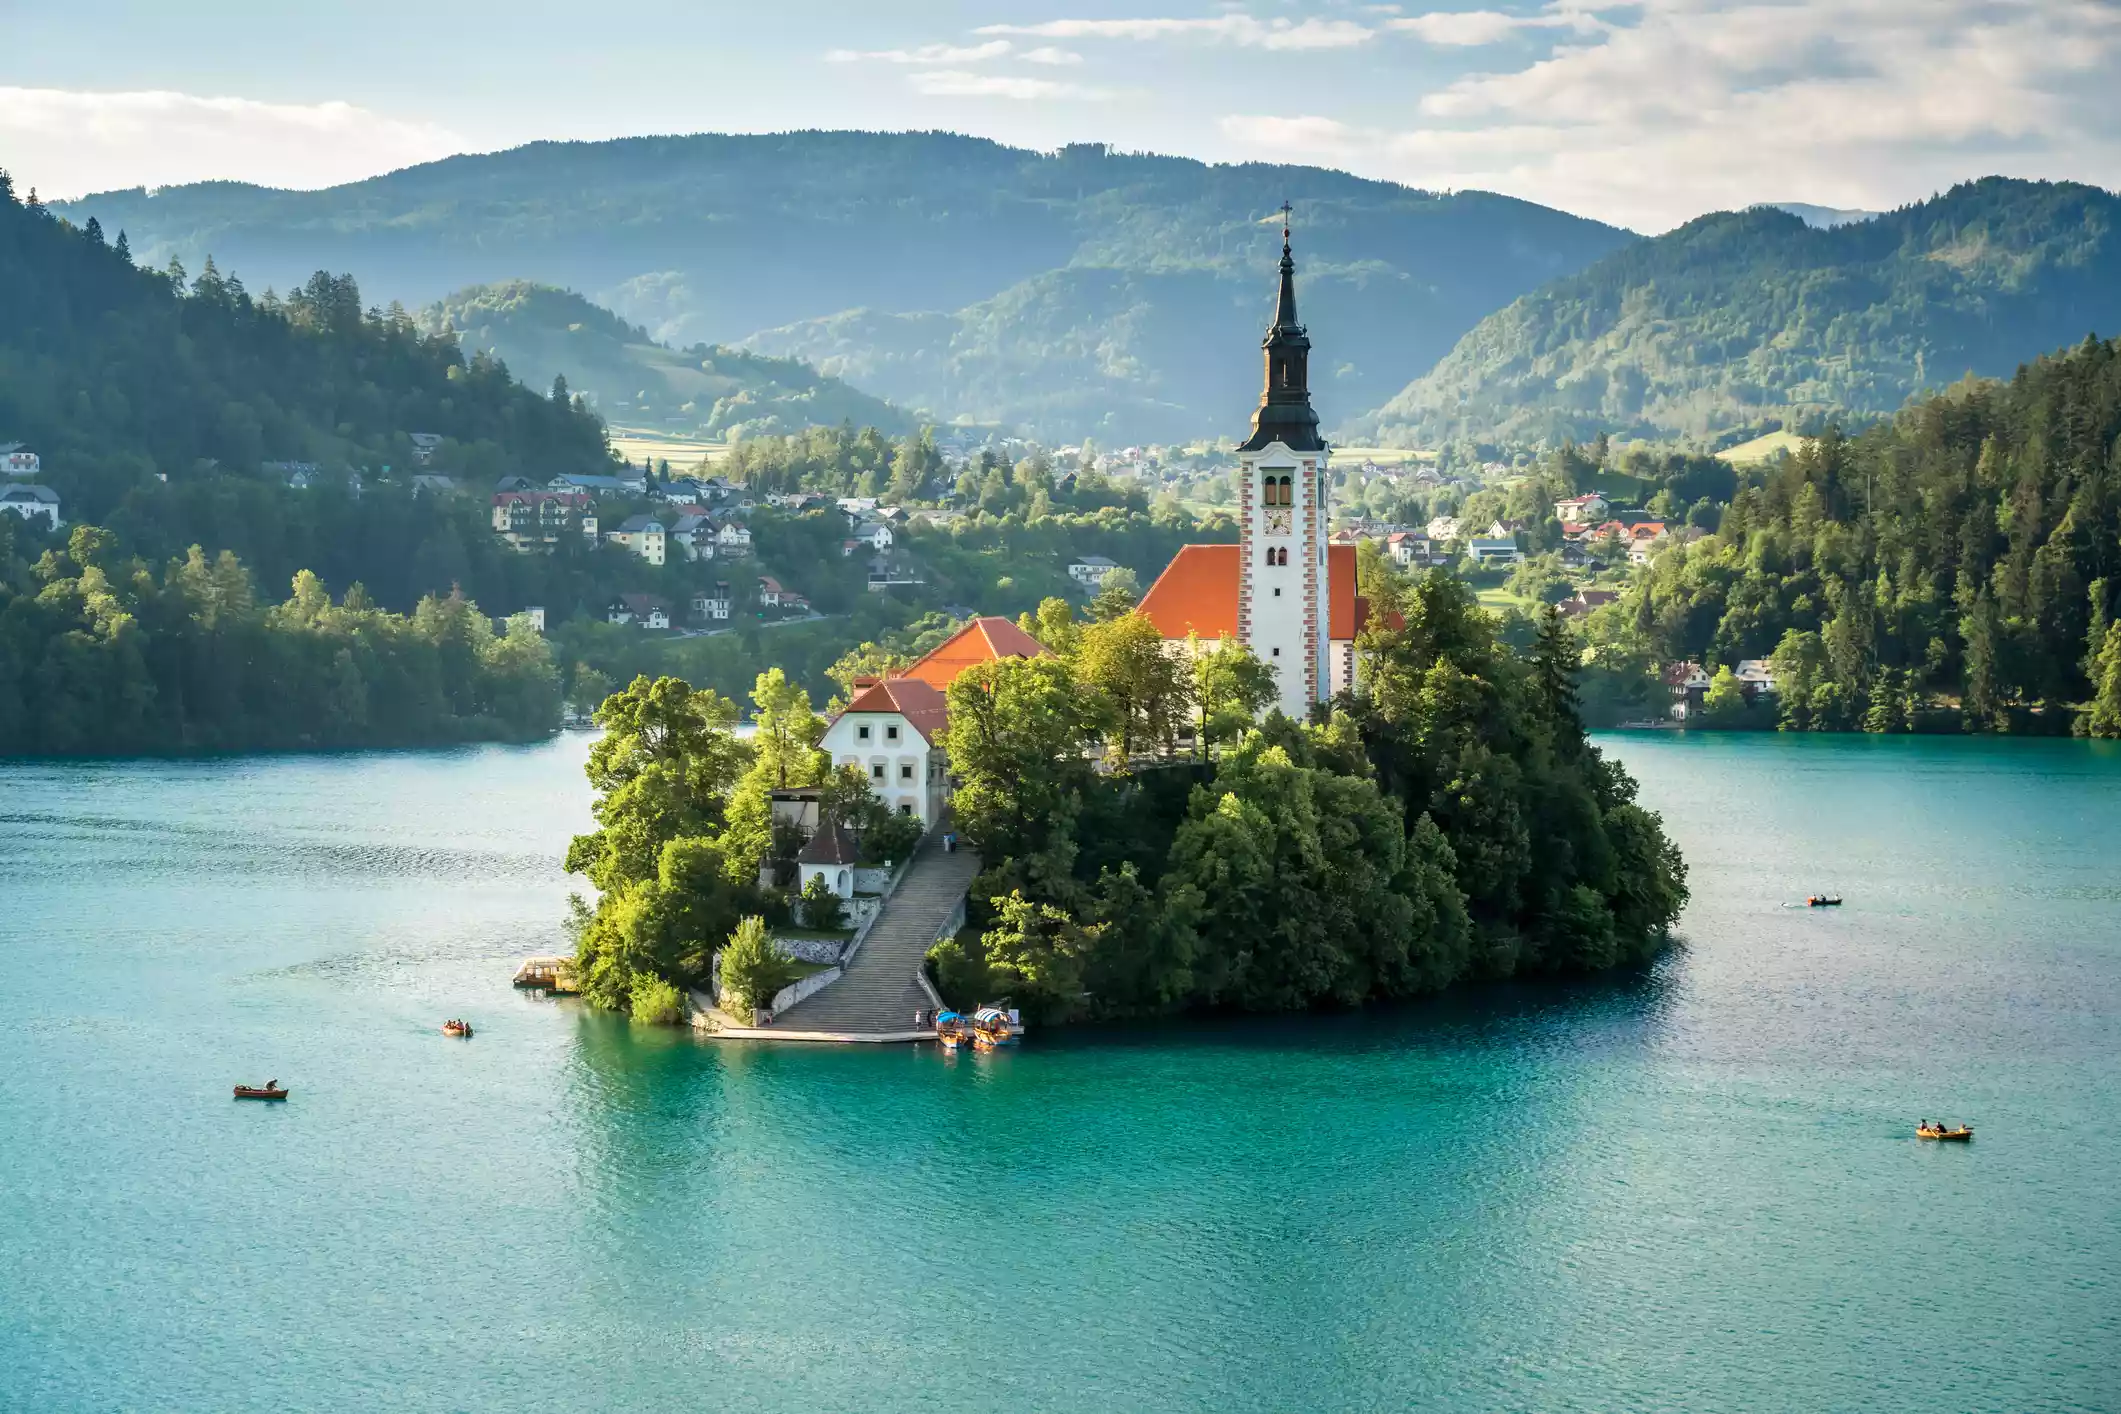 Church-topped island against mountains in Bled, Slovenia